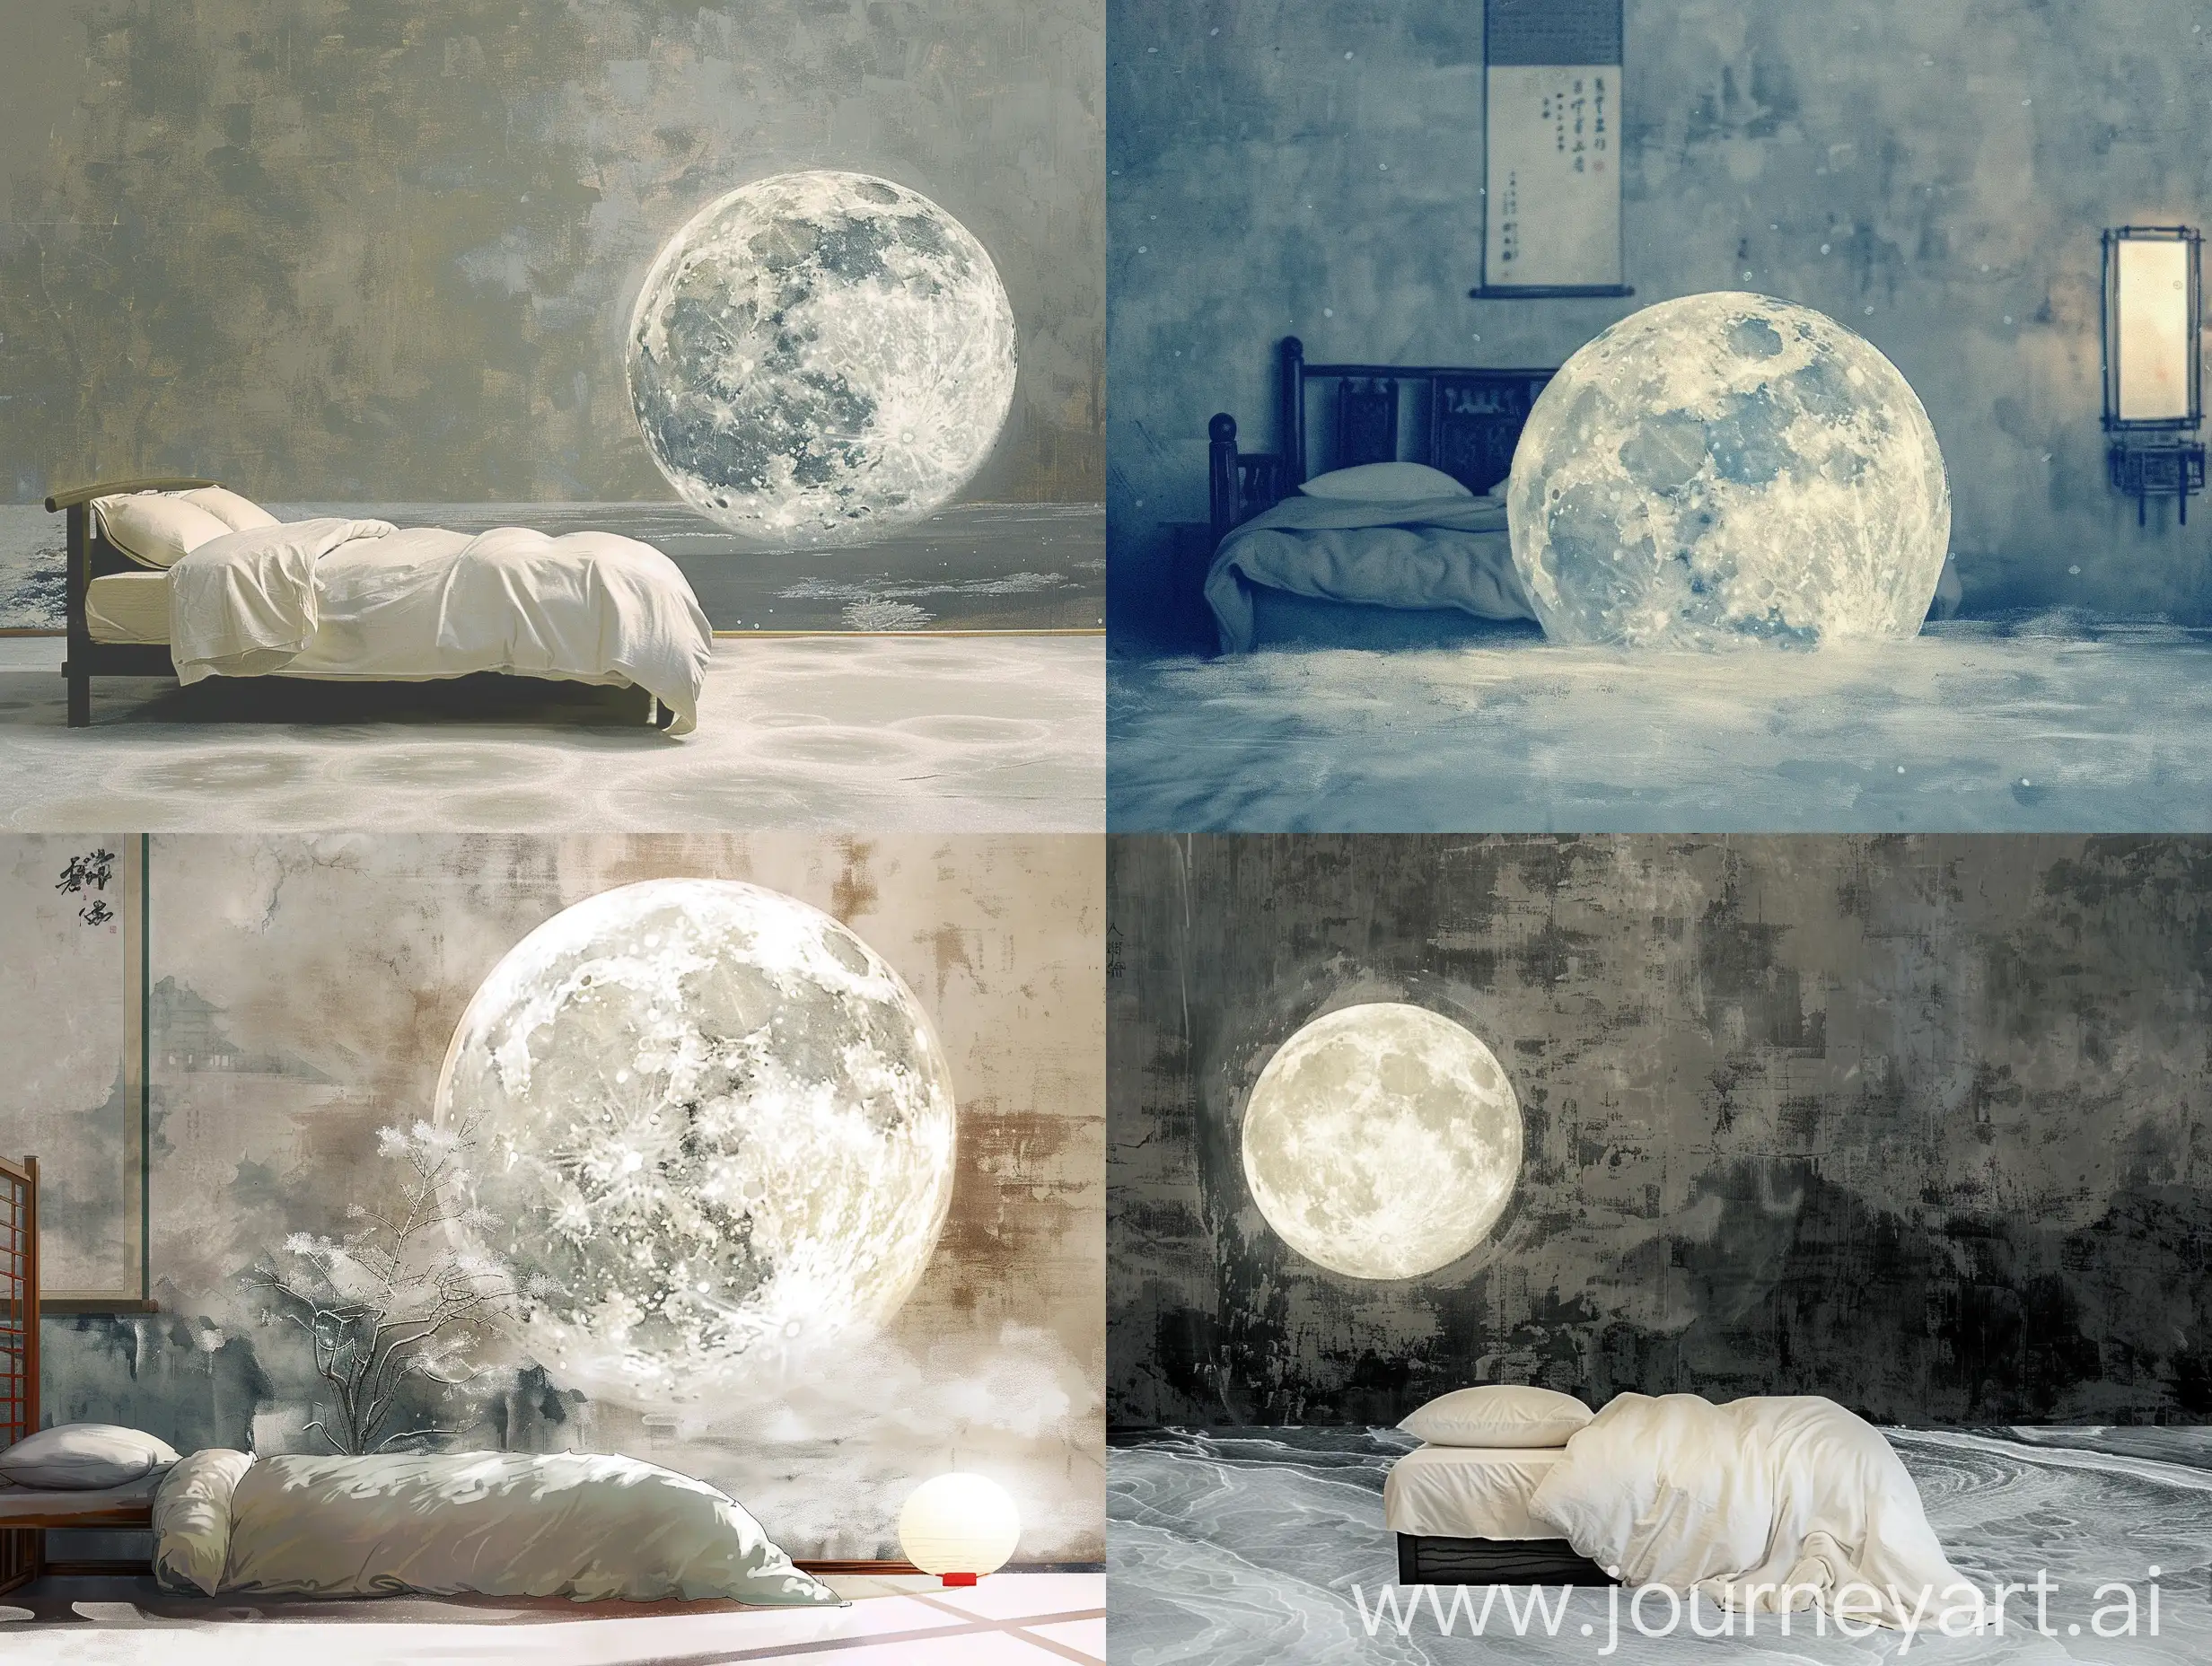 The bright moon in front of the bed is suspected to be frost on the ground. Raise your head to look at the bright moon and bow your head to think of your hometown, Chinese ink painting.